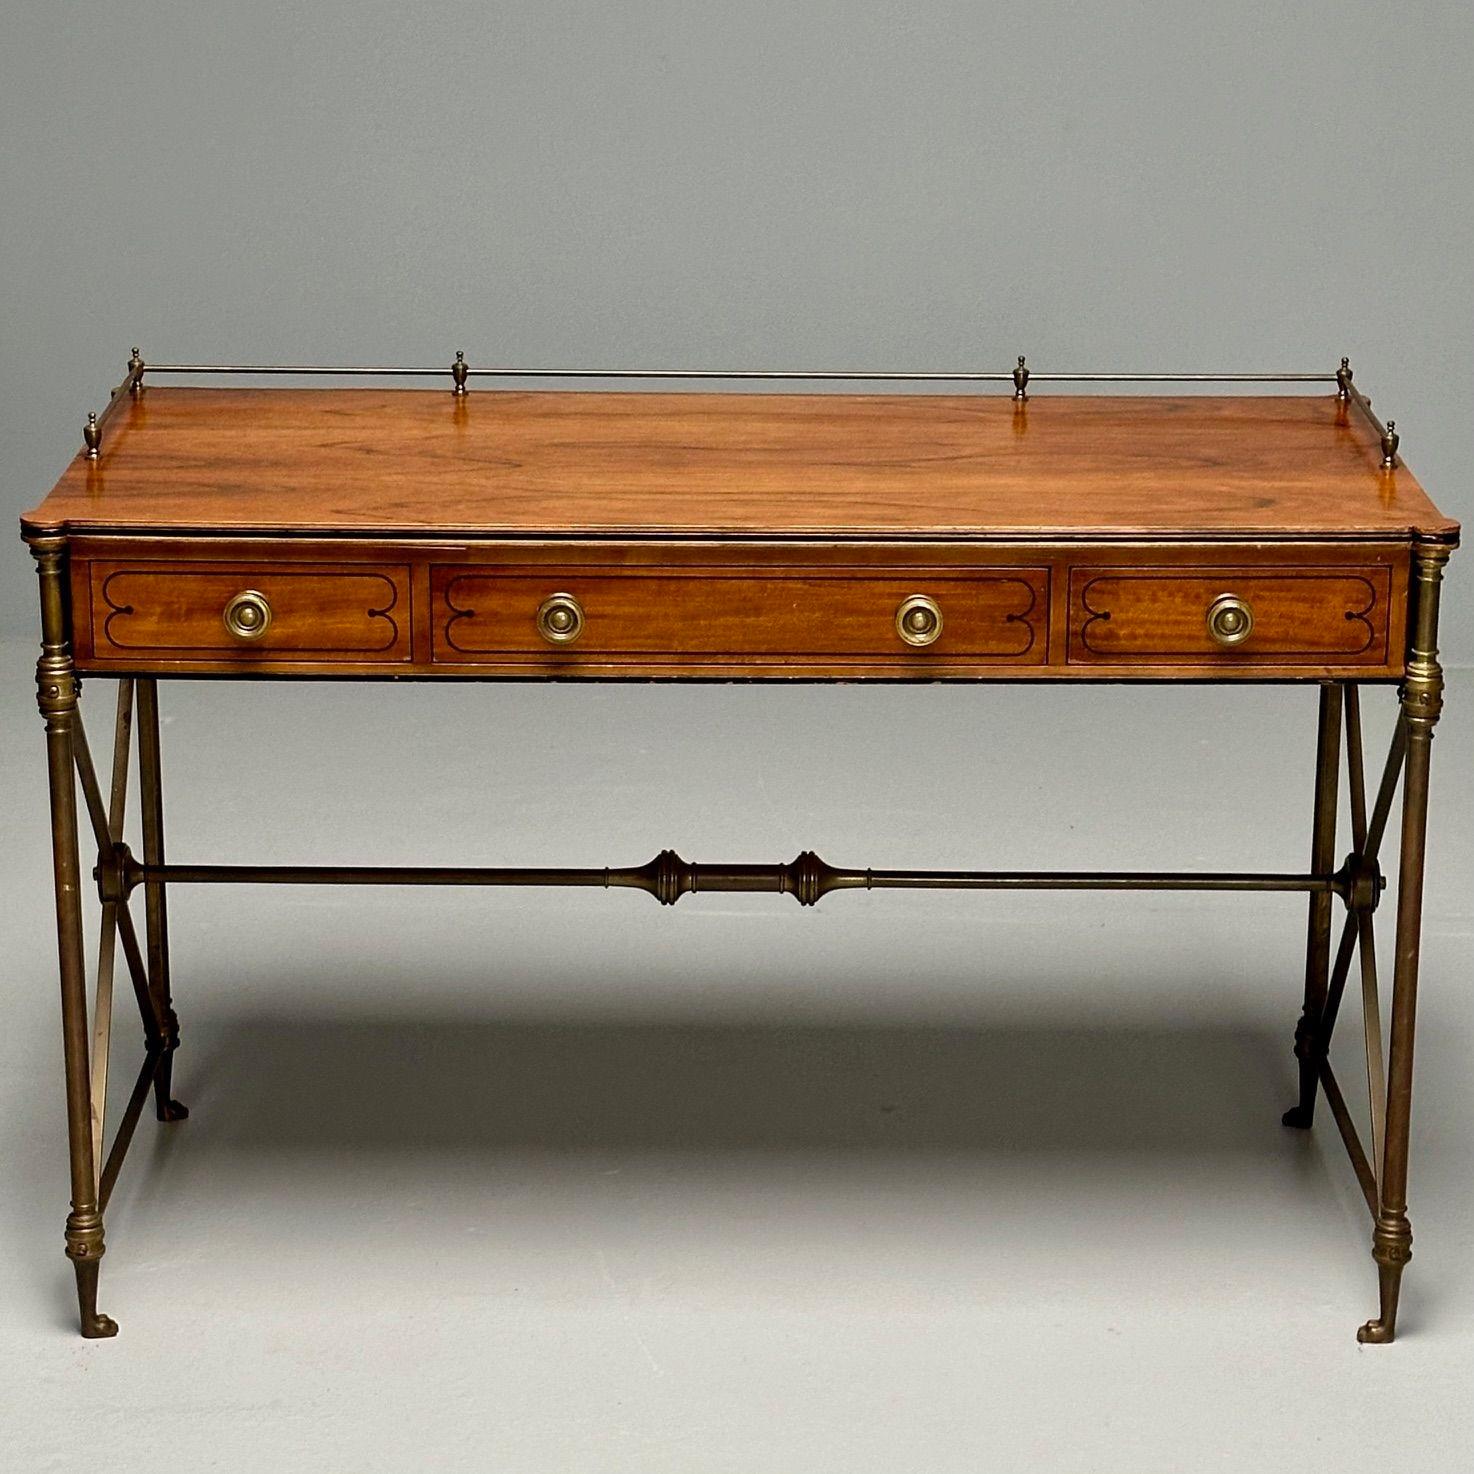 Kittinger, English Regency, Campaign Desk, Rosewood, Satinwood, Brass, USA 1950s

Regency campaign desk designed and produced by Kittinger in the United States, circa 1950s. This desk is comprised of rosewood and satinwood with ebonized drawer